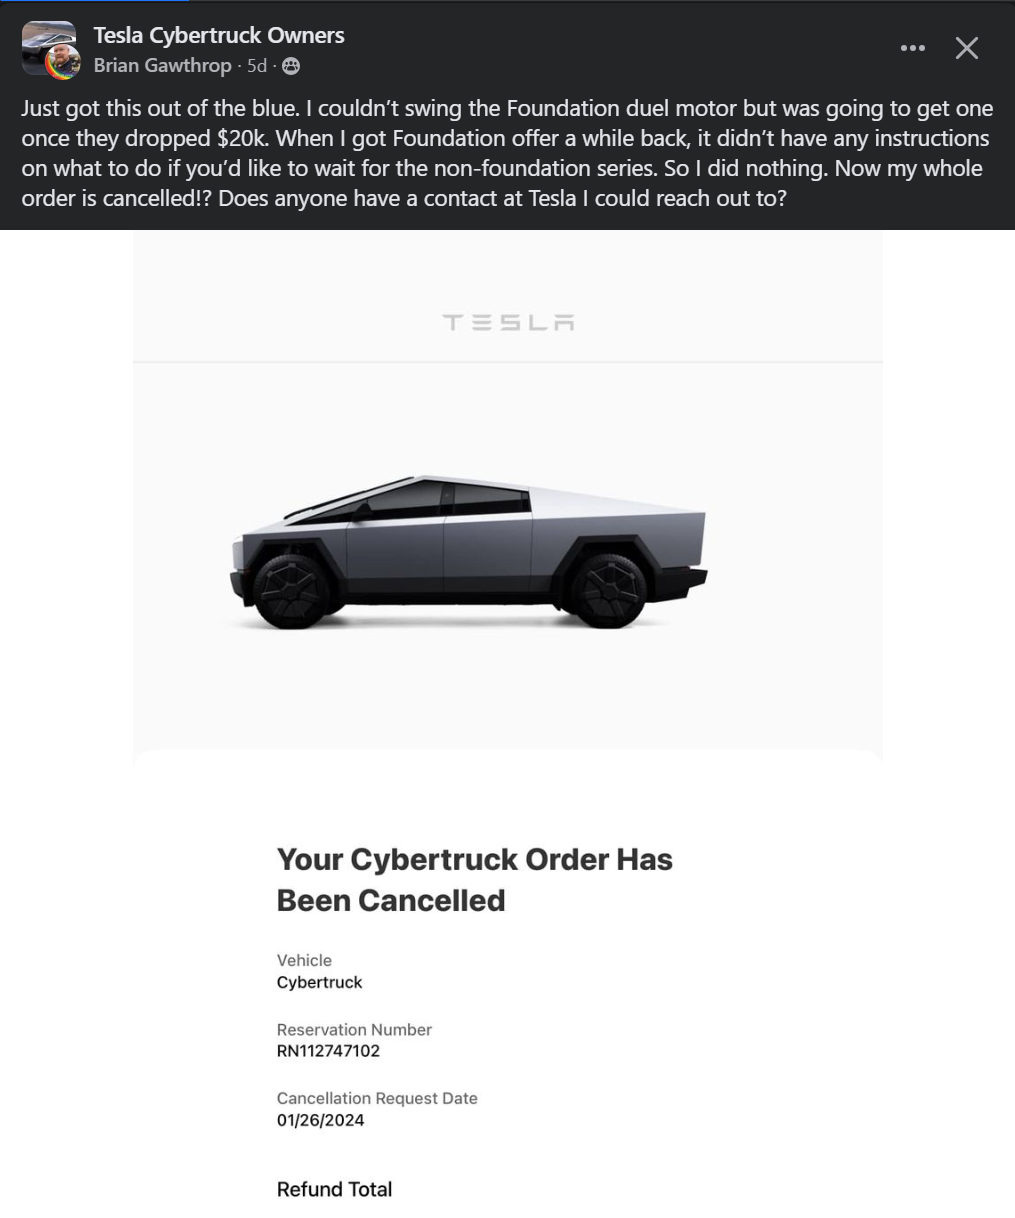 Tesla Cybertruck Update: Selling a Cybertruck reservation may have gotten this person's order invitation cancelled by Tesla 1706760942781